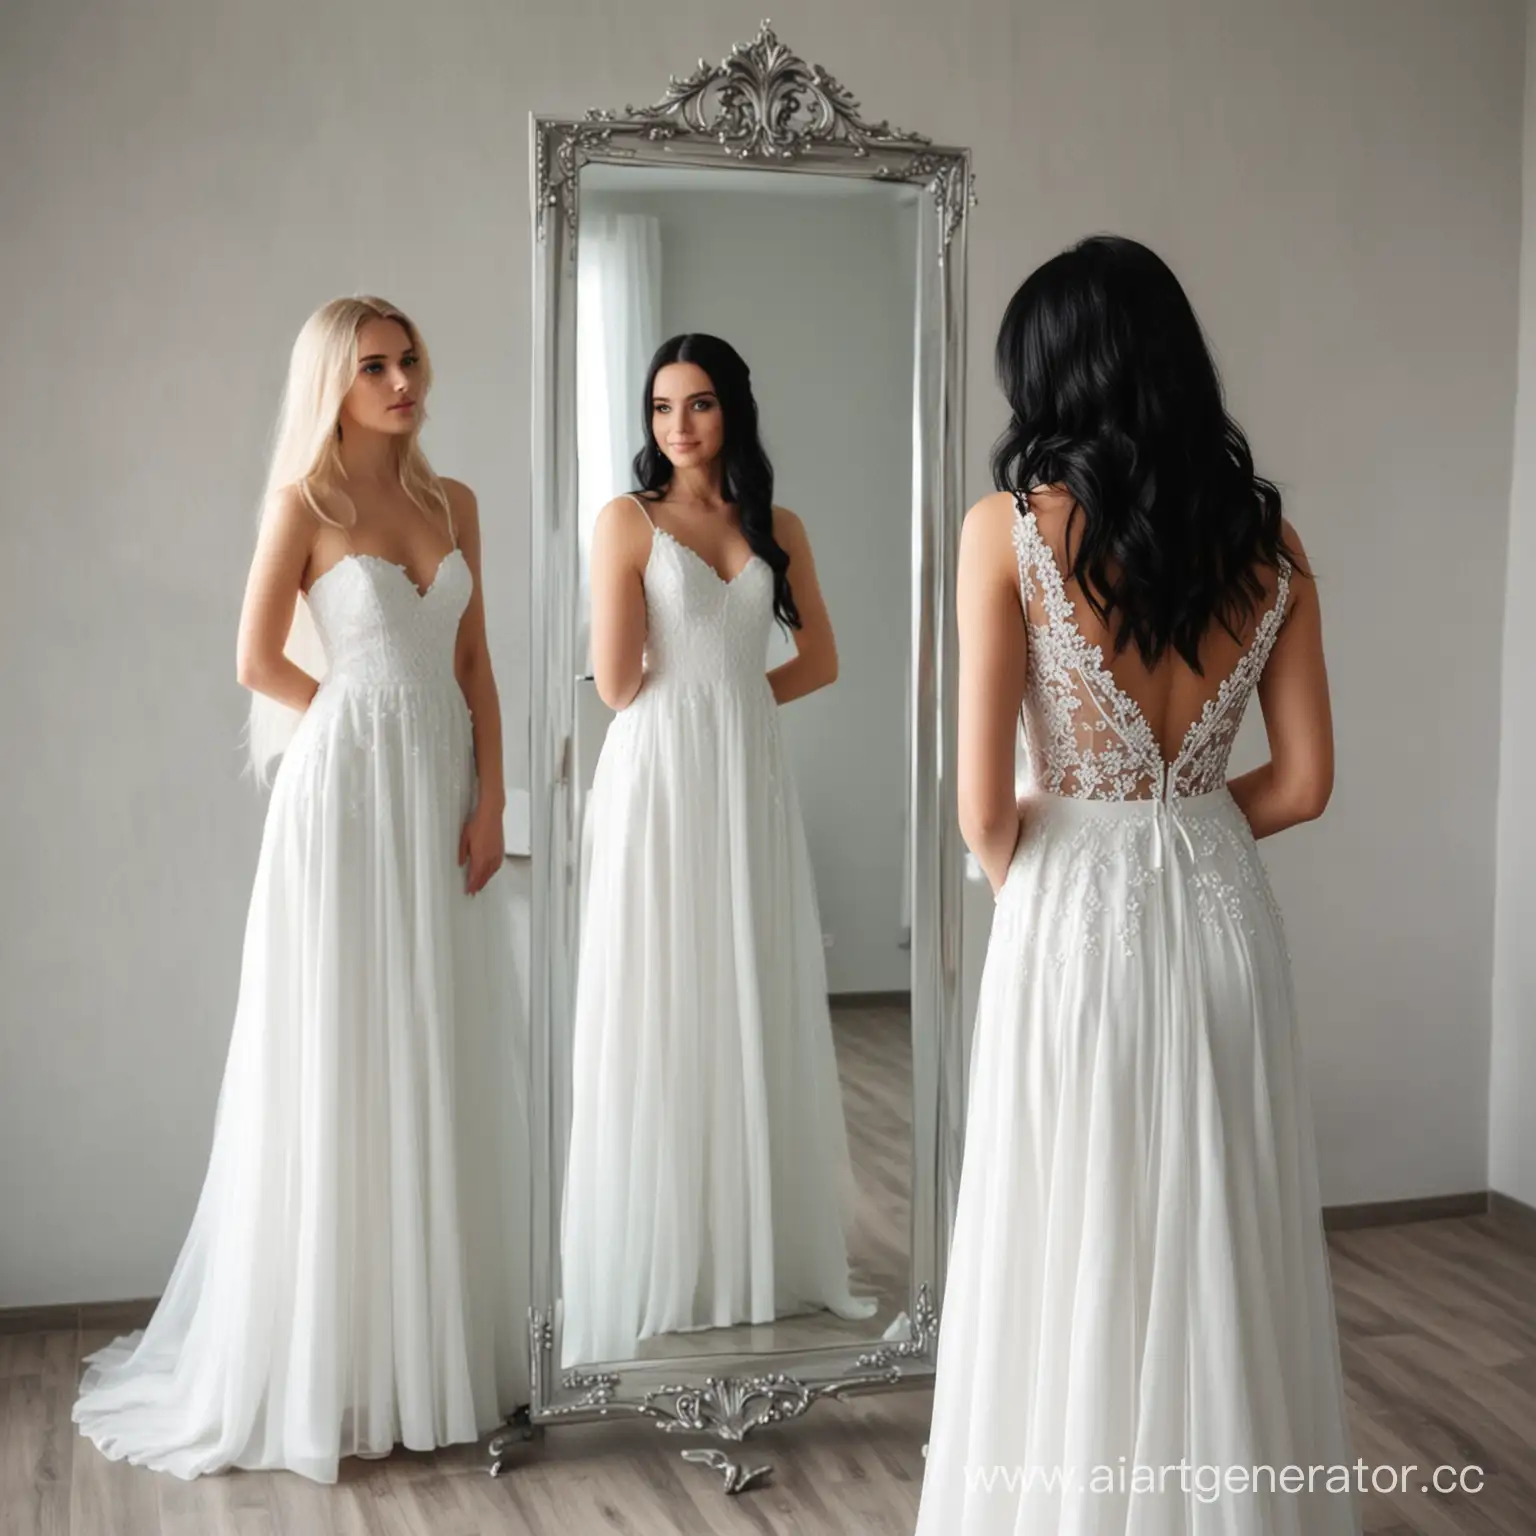 A beautiful blonde girl in a beautiful white wedding dress is standing at the mirror and next to her is a girl with black hair